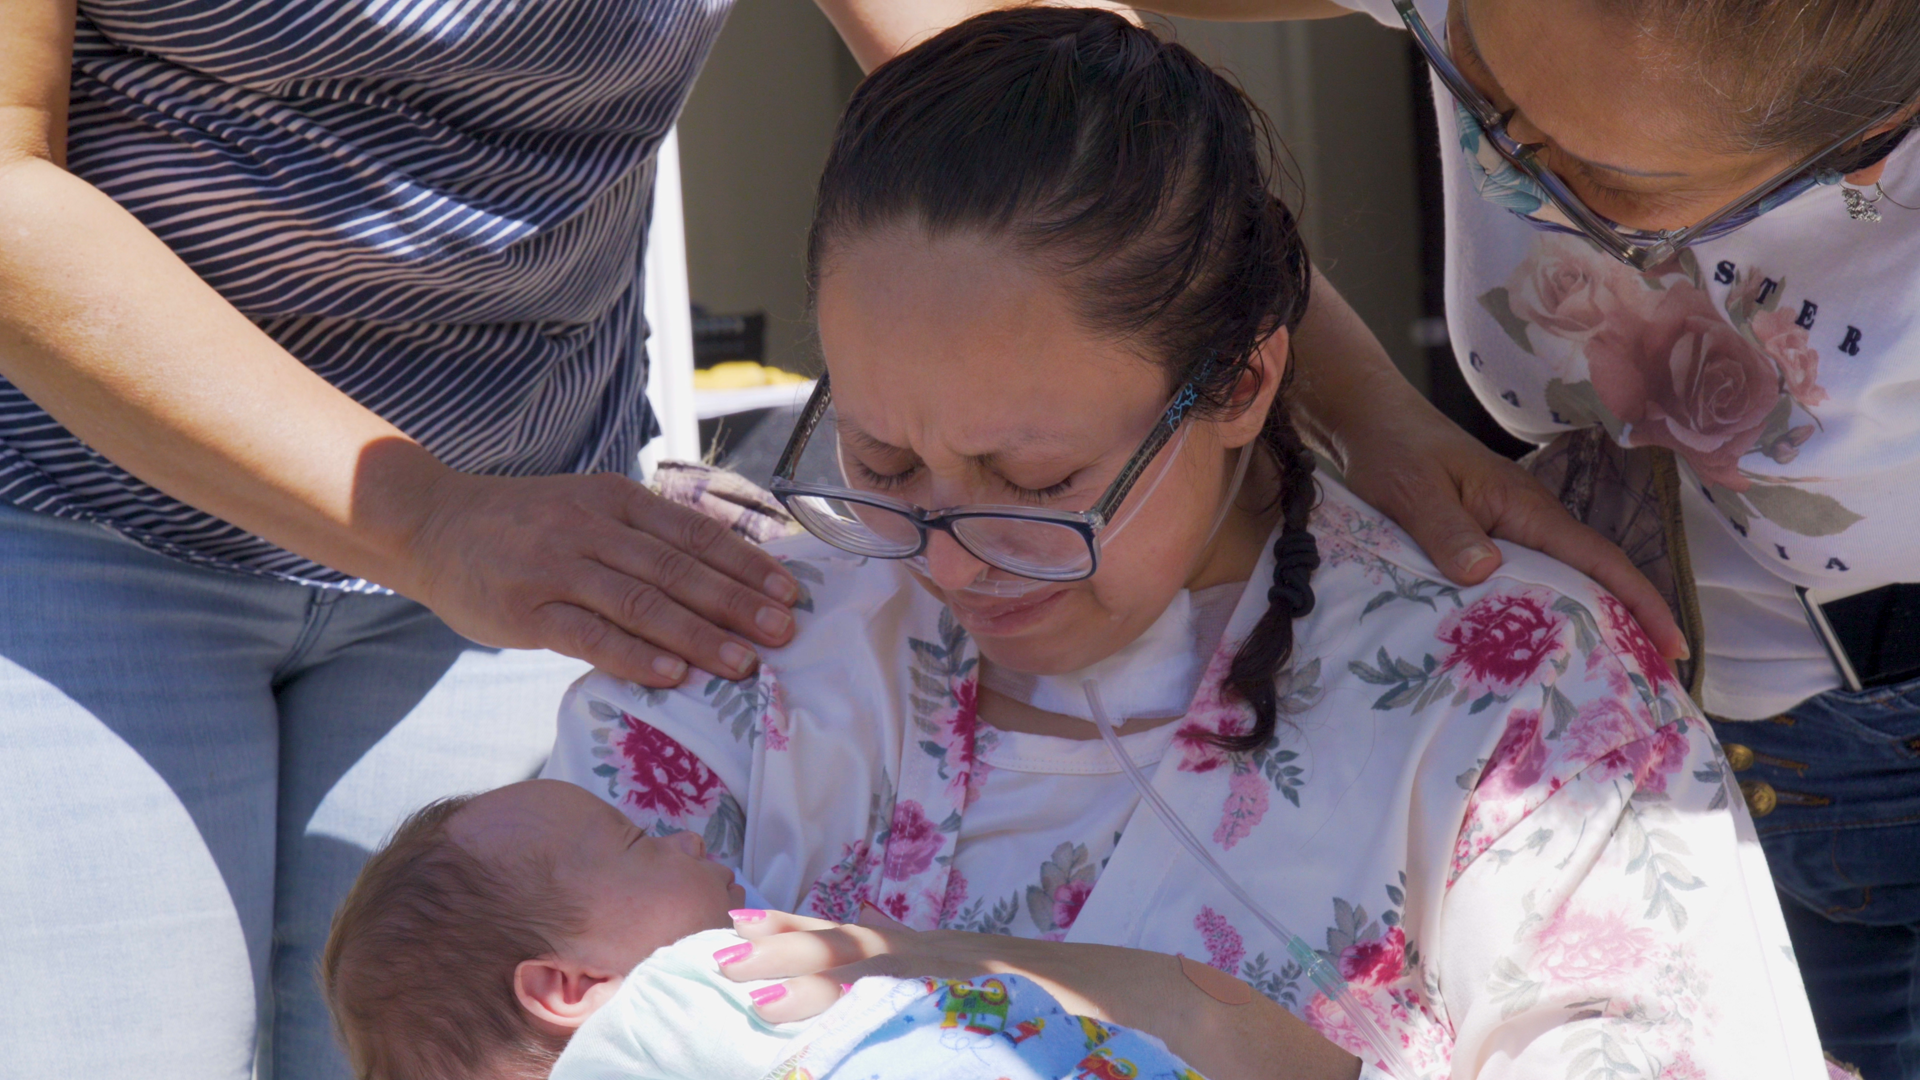 Daysi Marcillo contracted COVID-19 while pregnant and wound up intubated while doctors delivered her baby. She finally got to held her newborn son at home.